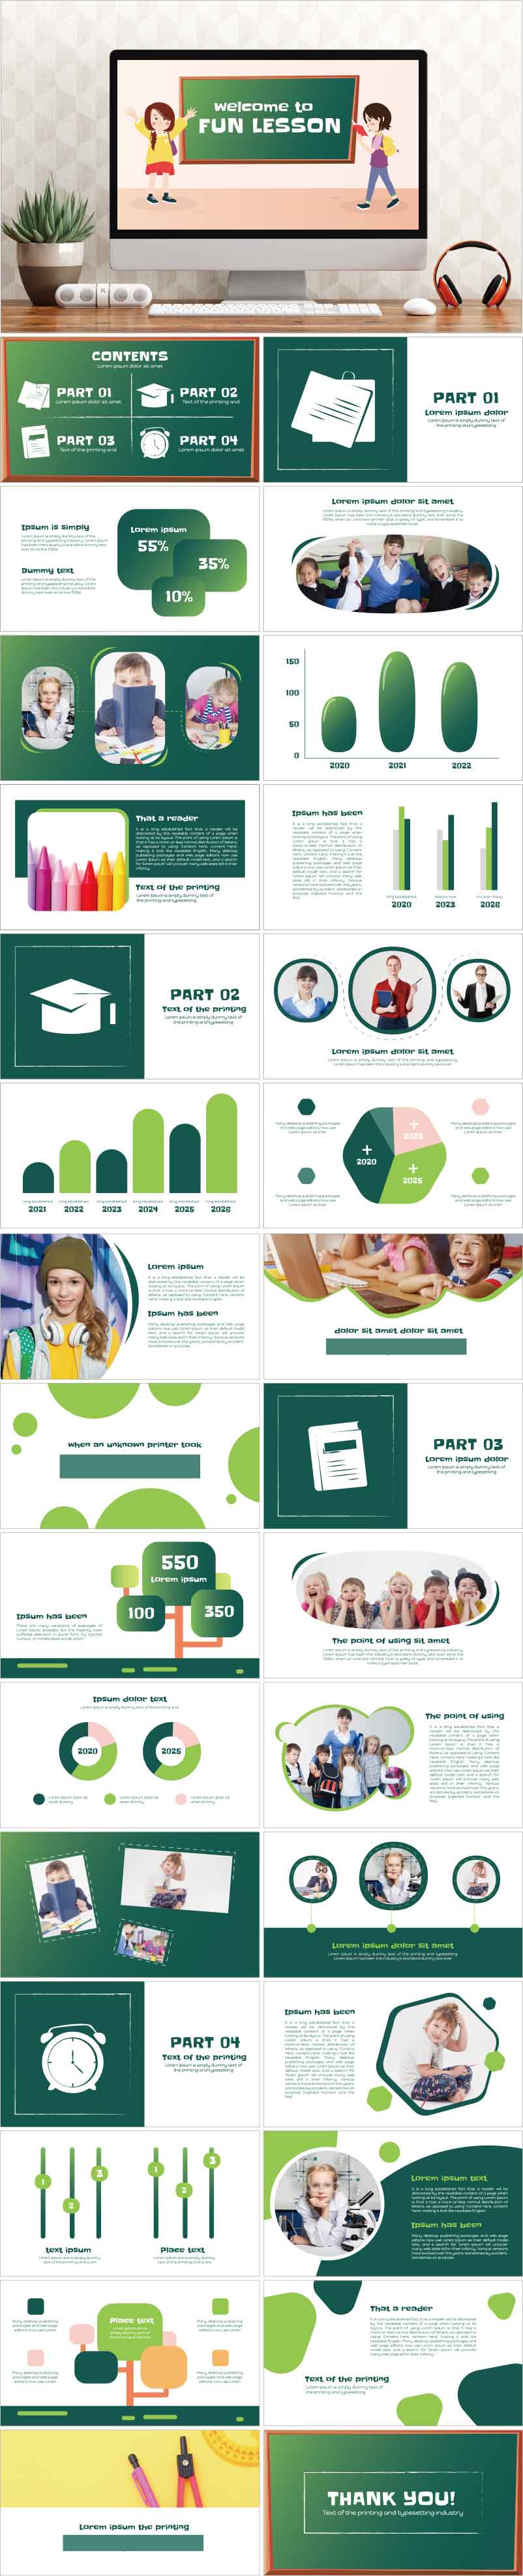 PowerPoint template vol.54